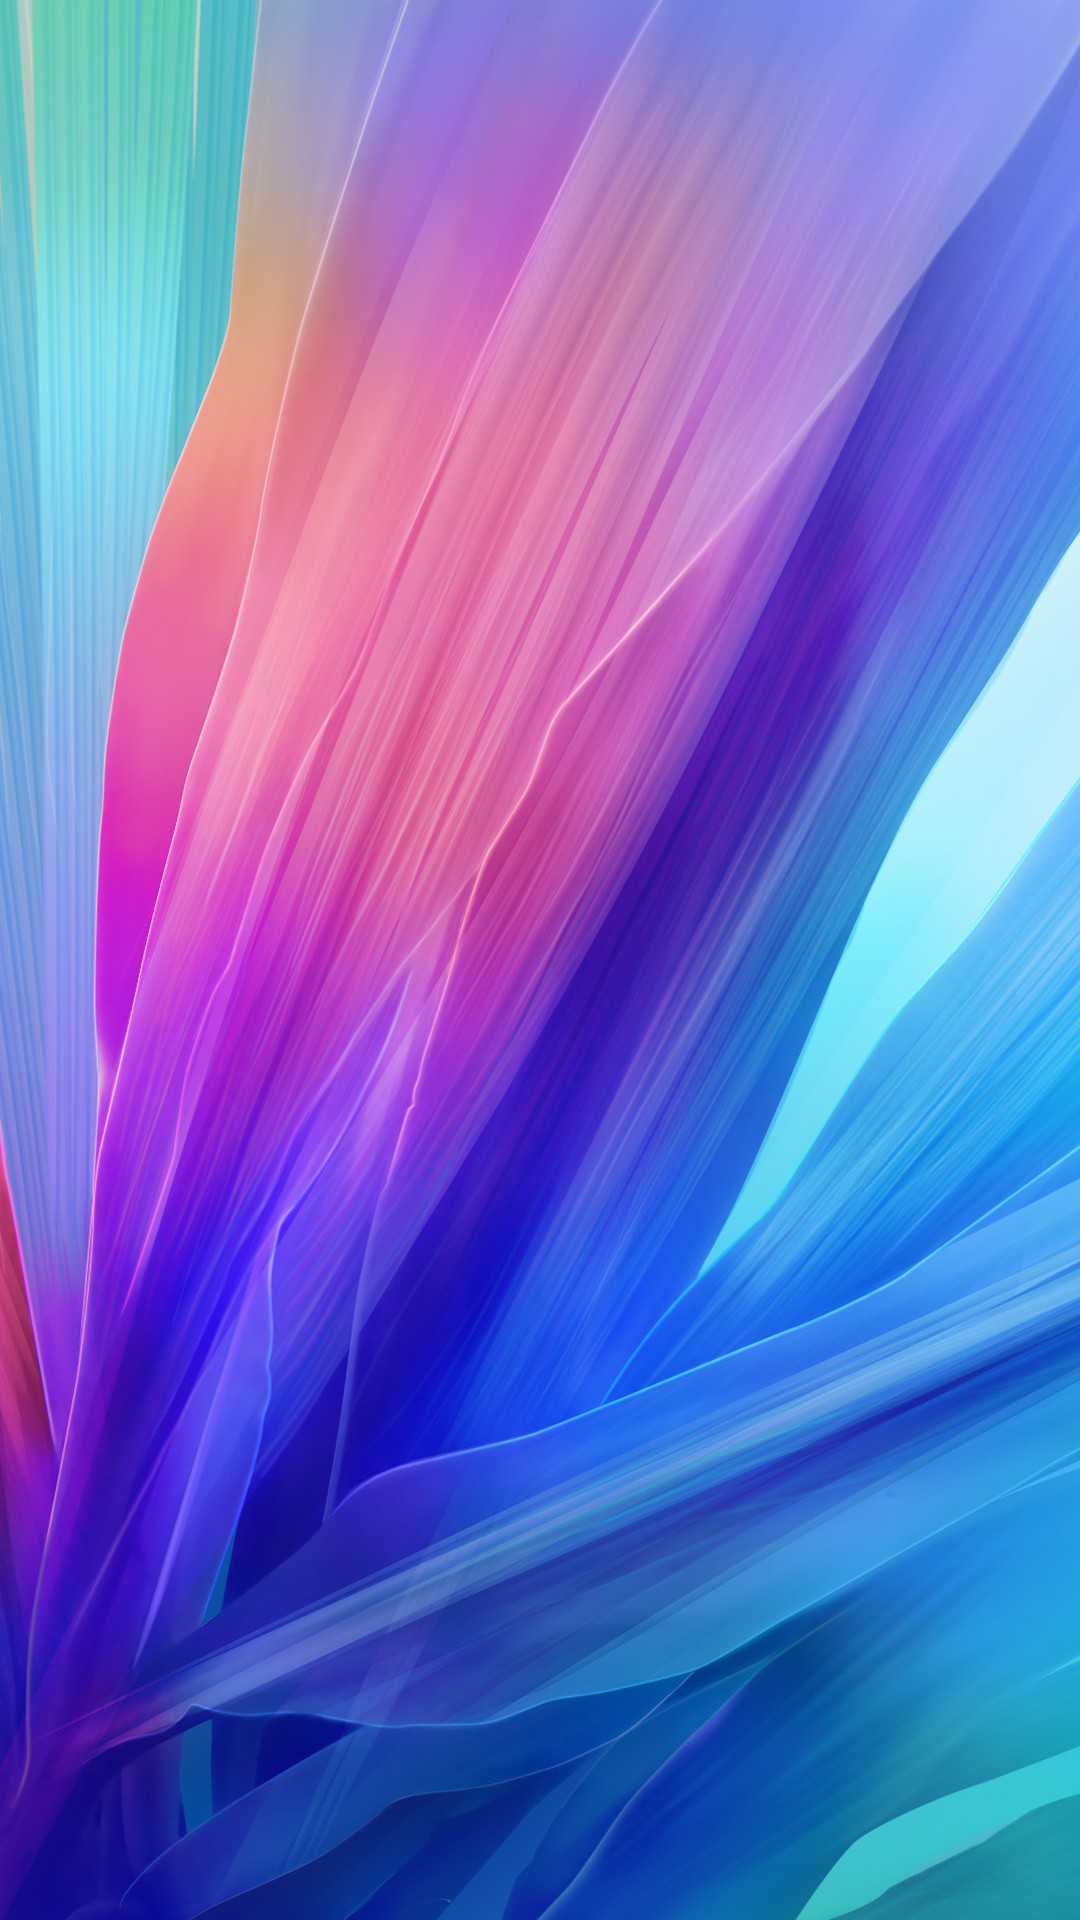 1080x1920 Colorful Abstract Galaxy S5 Wallpaper ()